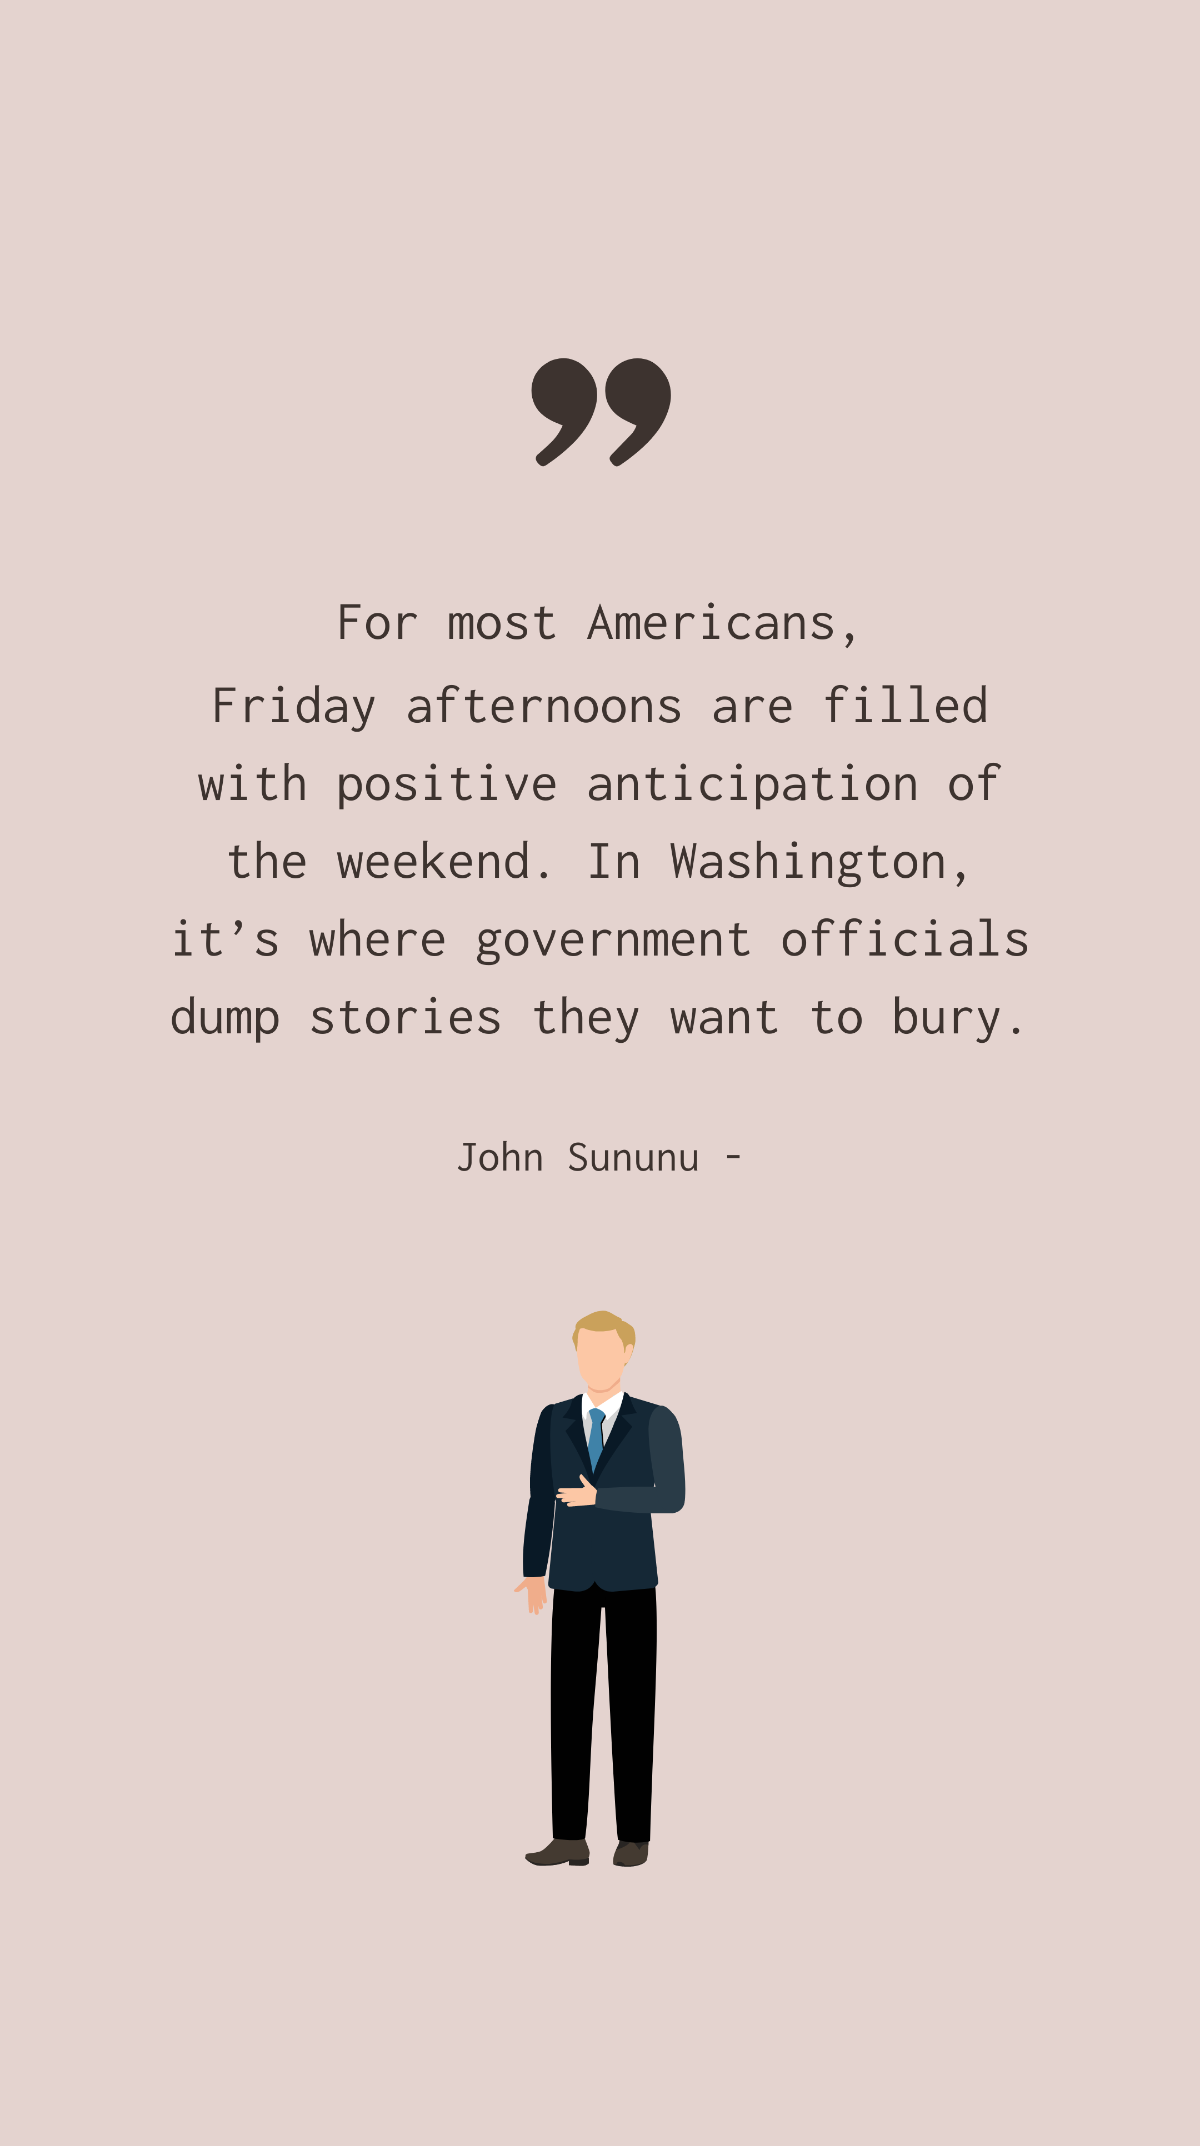 John Sununu - For most Americans, Friday afternoons are filled with positive anticipation of the weekend. In Washington, it’s where government officials dump stories they want to bury.